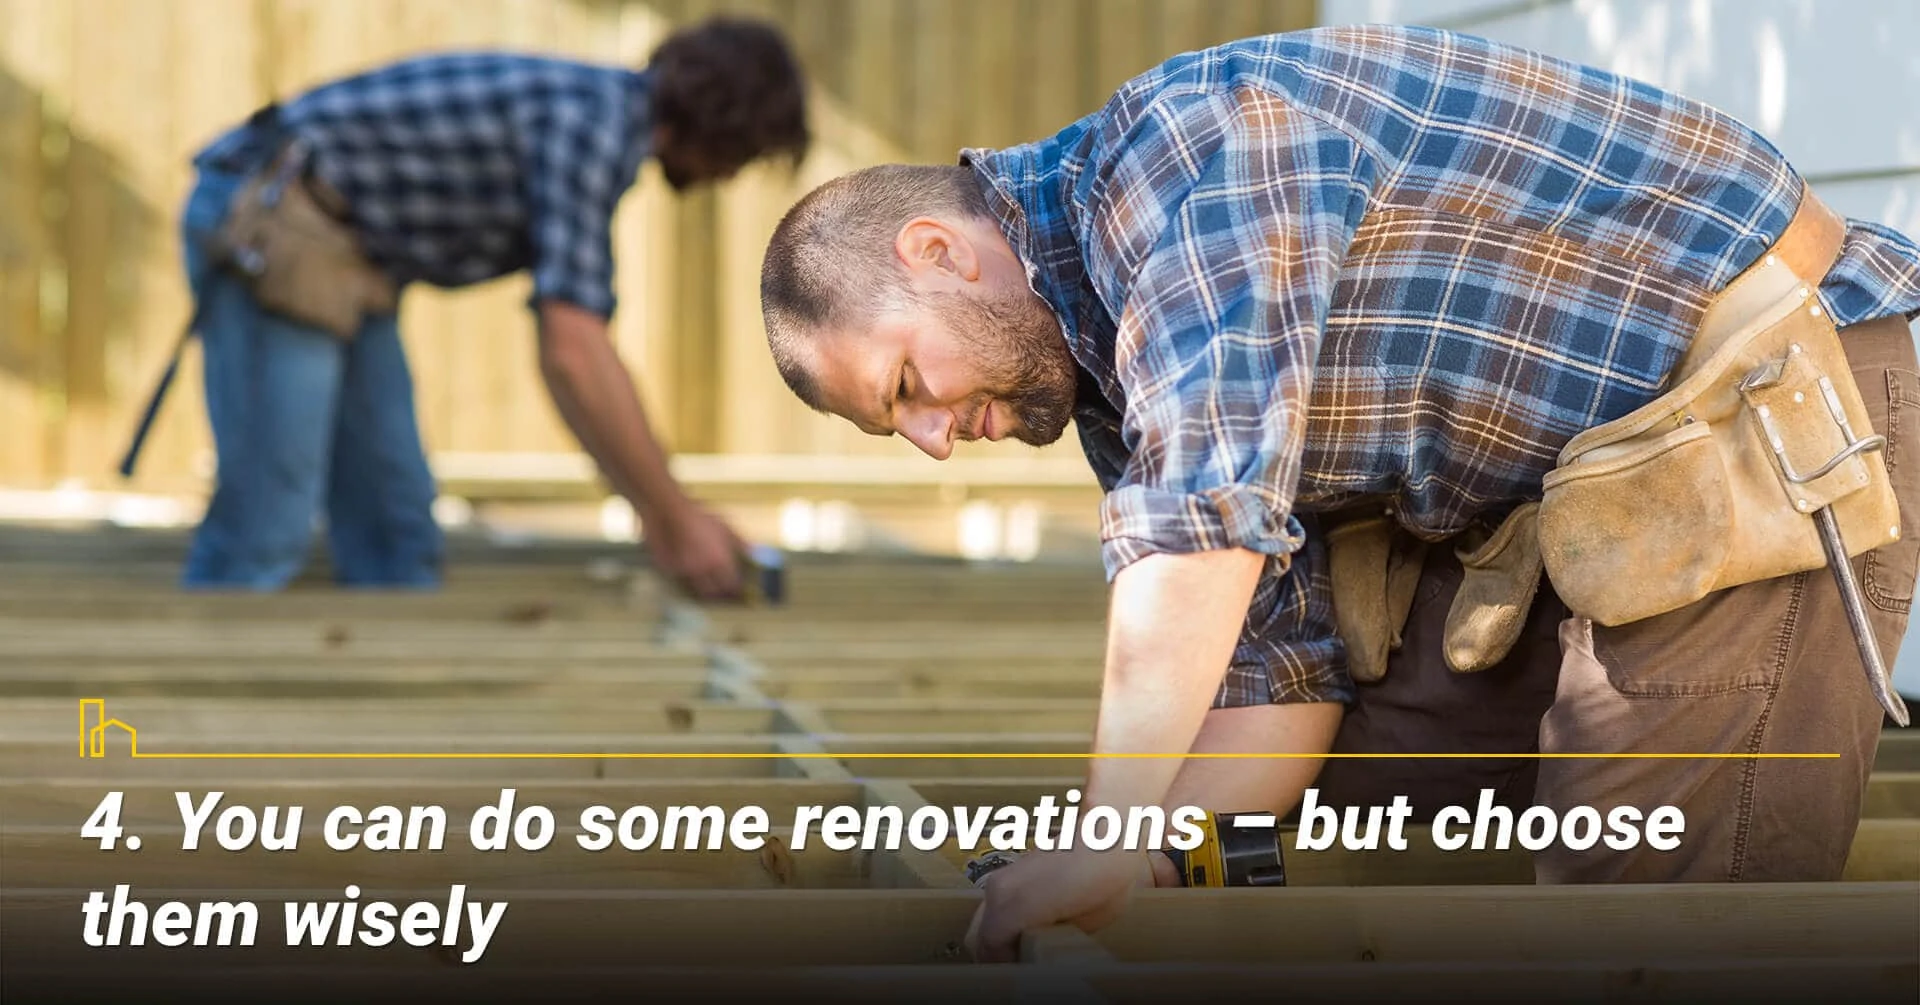 You can do some renovations - but choose them wisely, tackle some diy projects